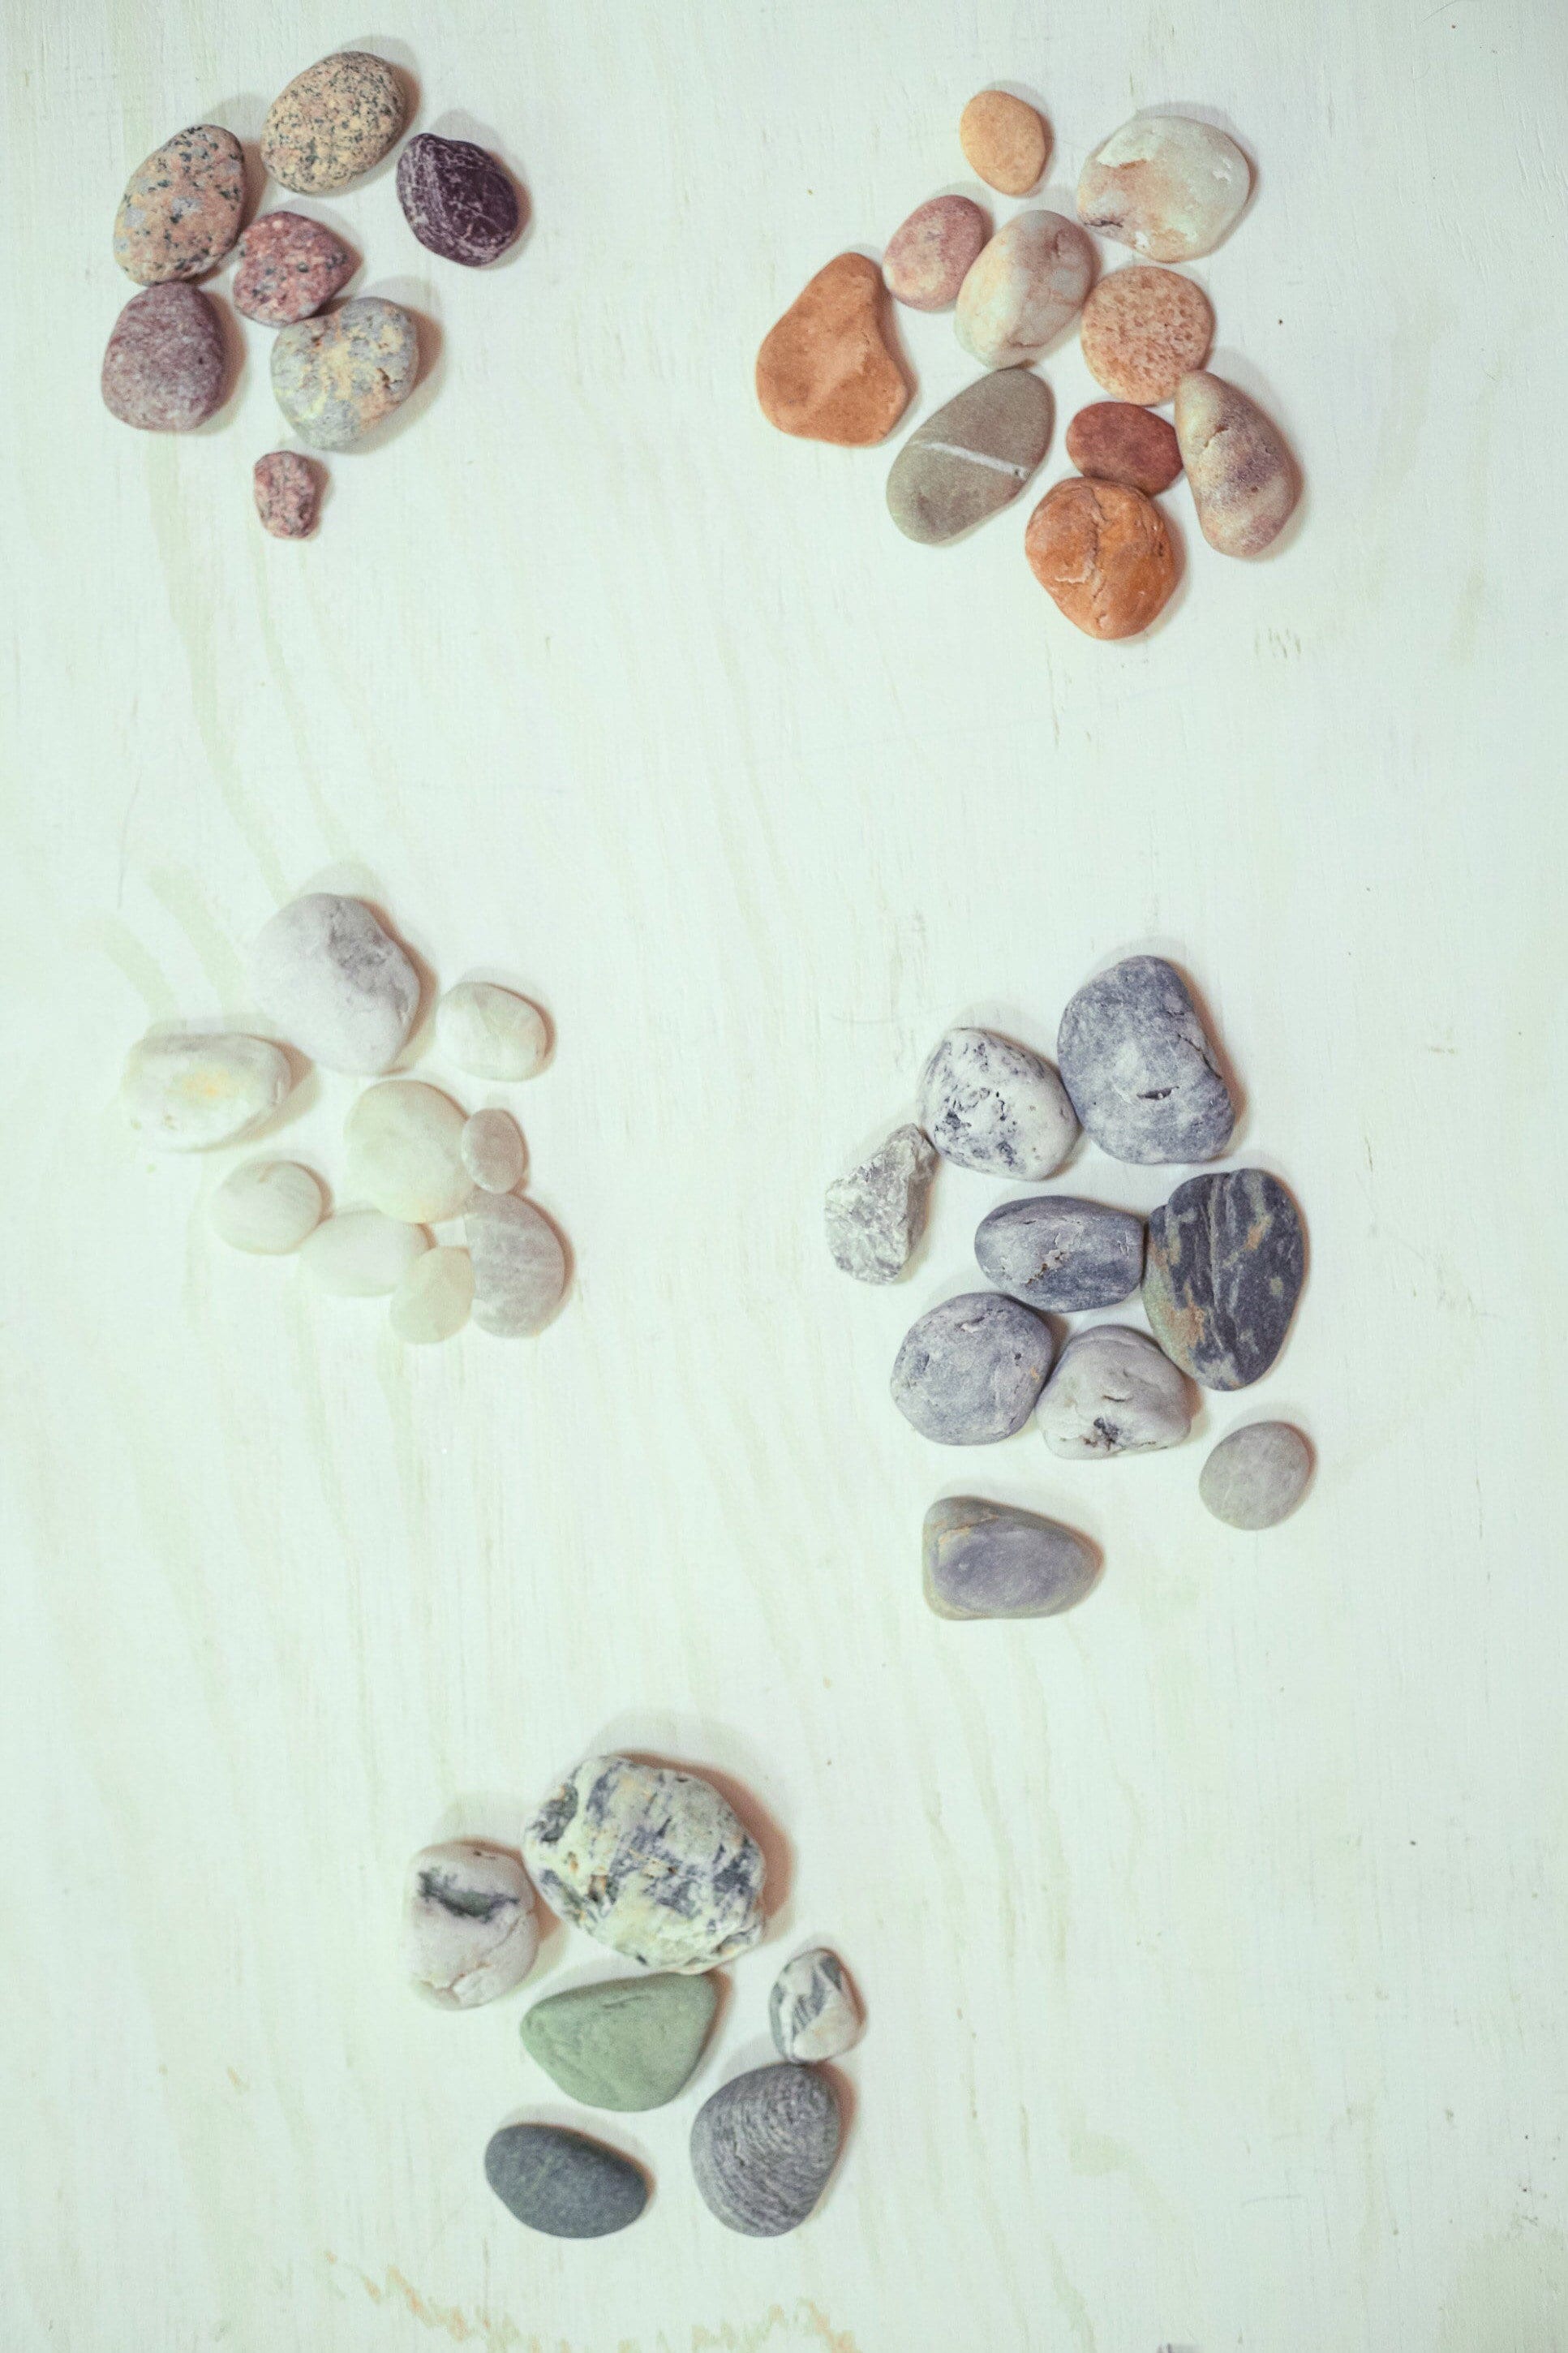 Beach Stone Lots by Color in Organza Bag - Vintage Pebbles Beach Rocks from Collector's Beach Finds